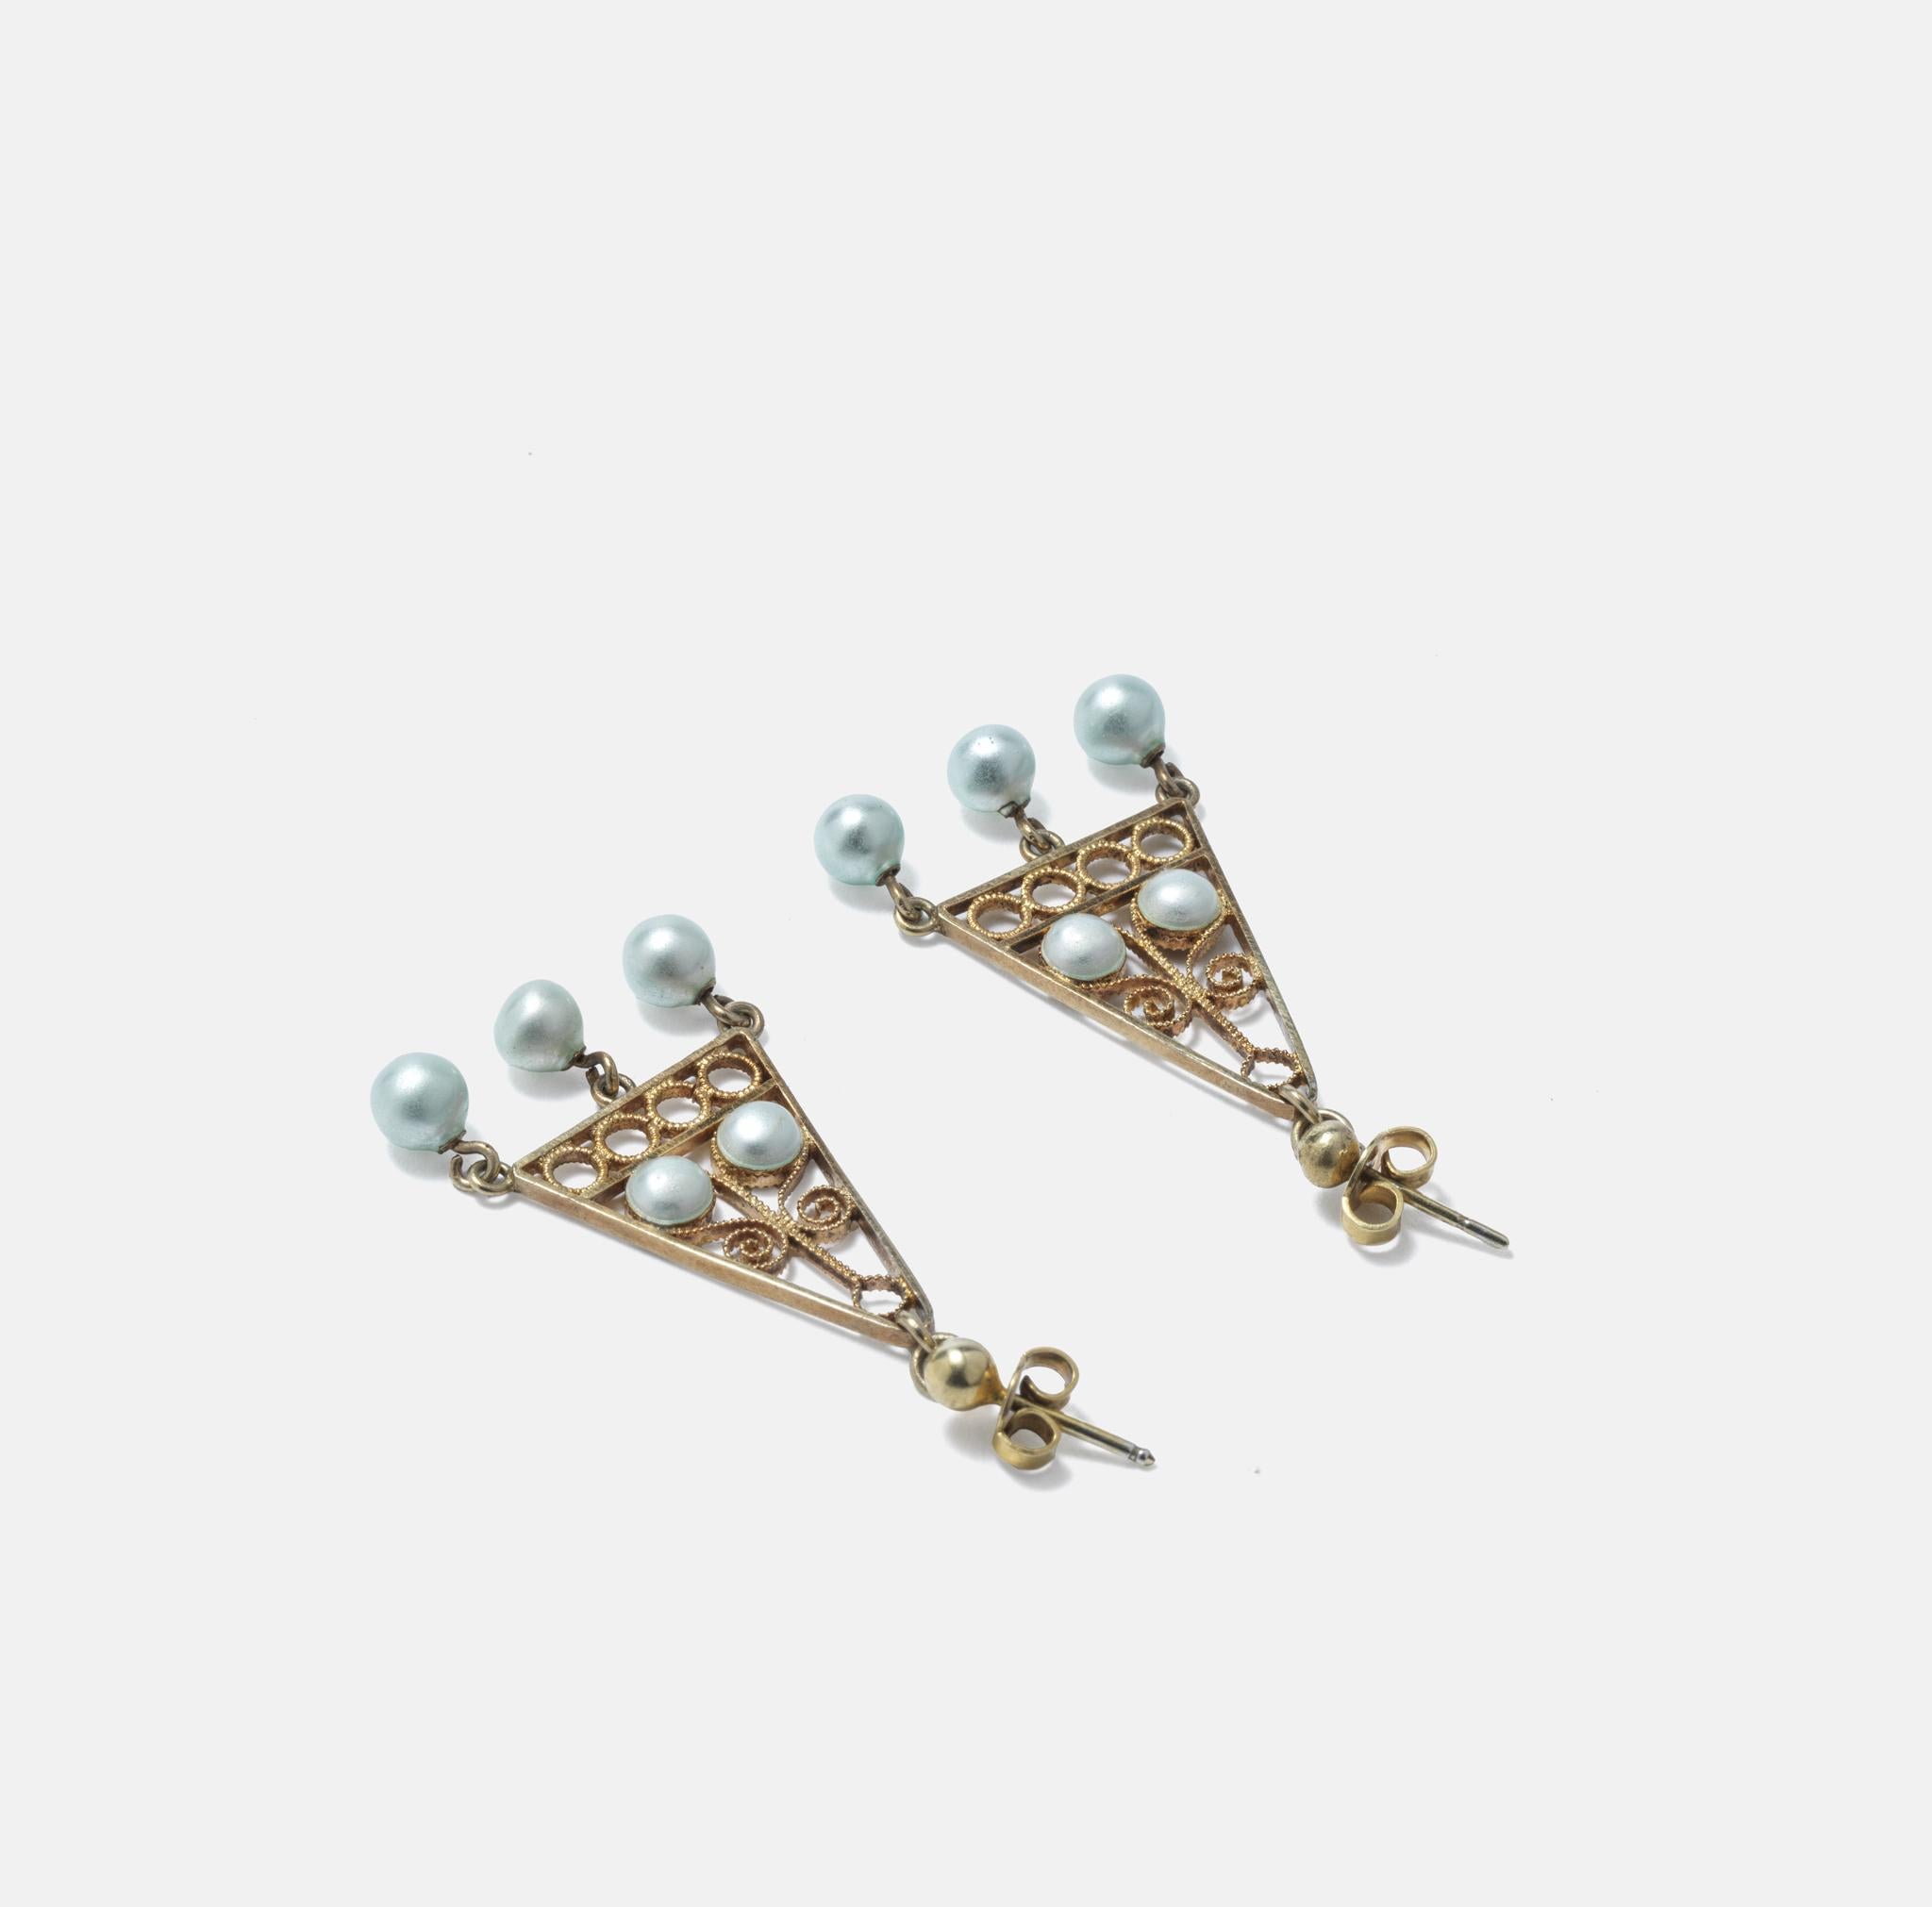 Bead Vintage Swedish earrings. Gilt silver and pearls. For Sale